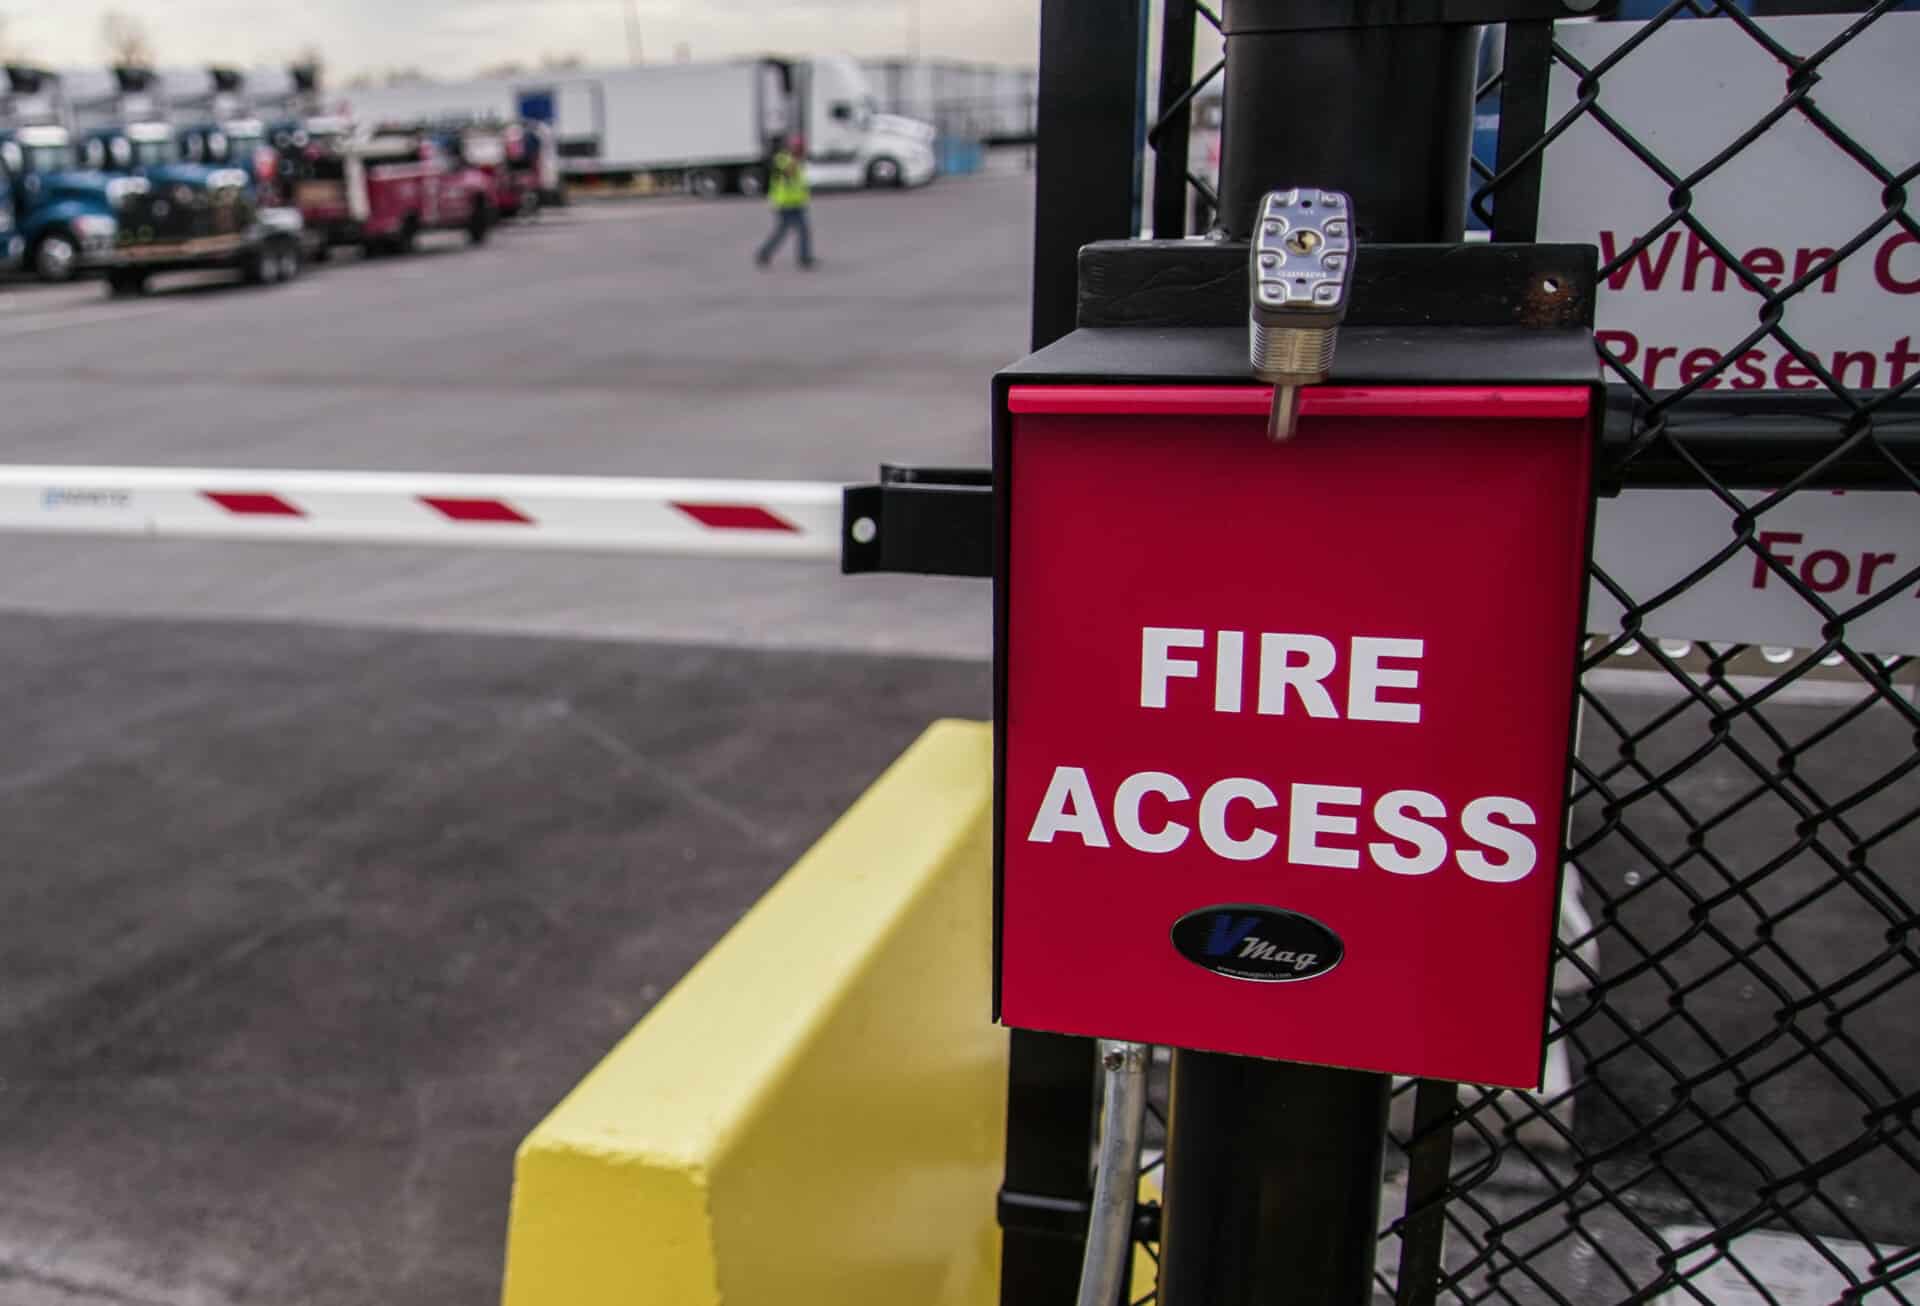 Fire access box at security gate entry